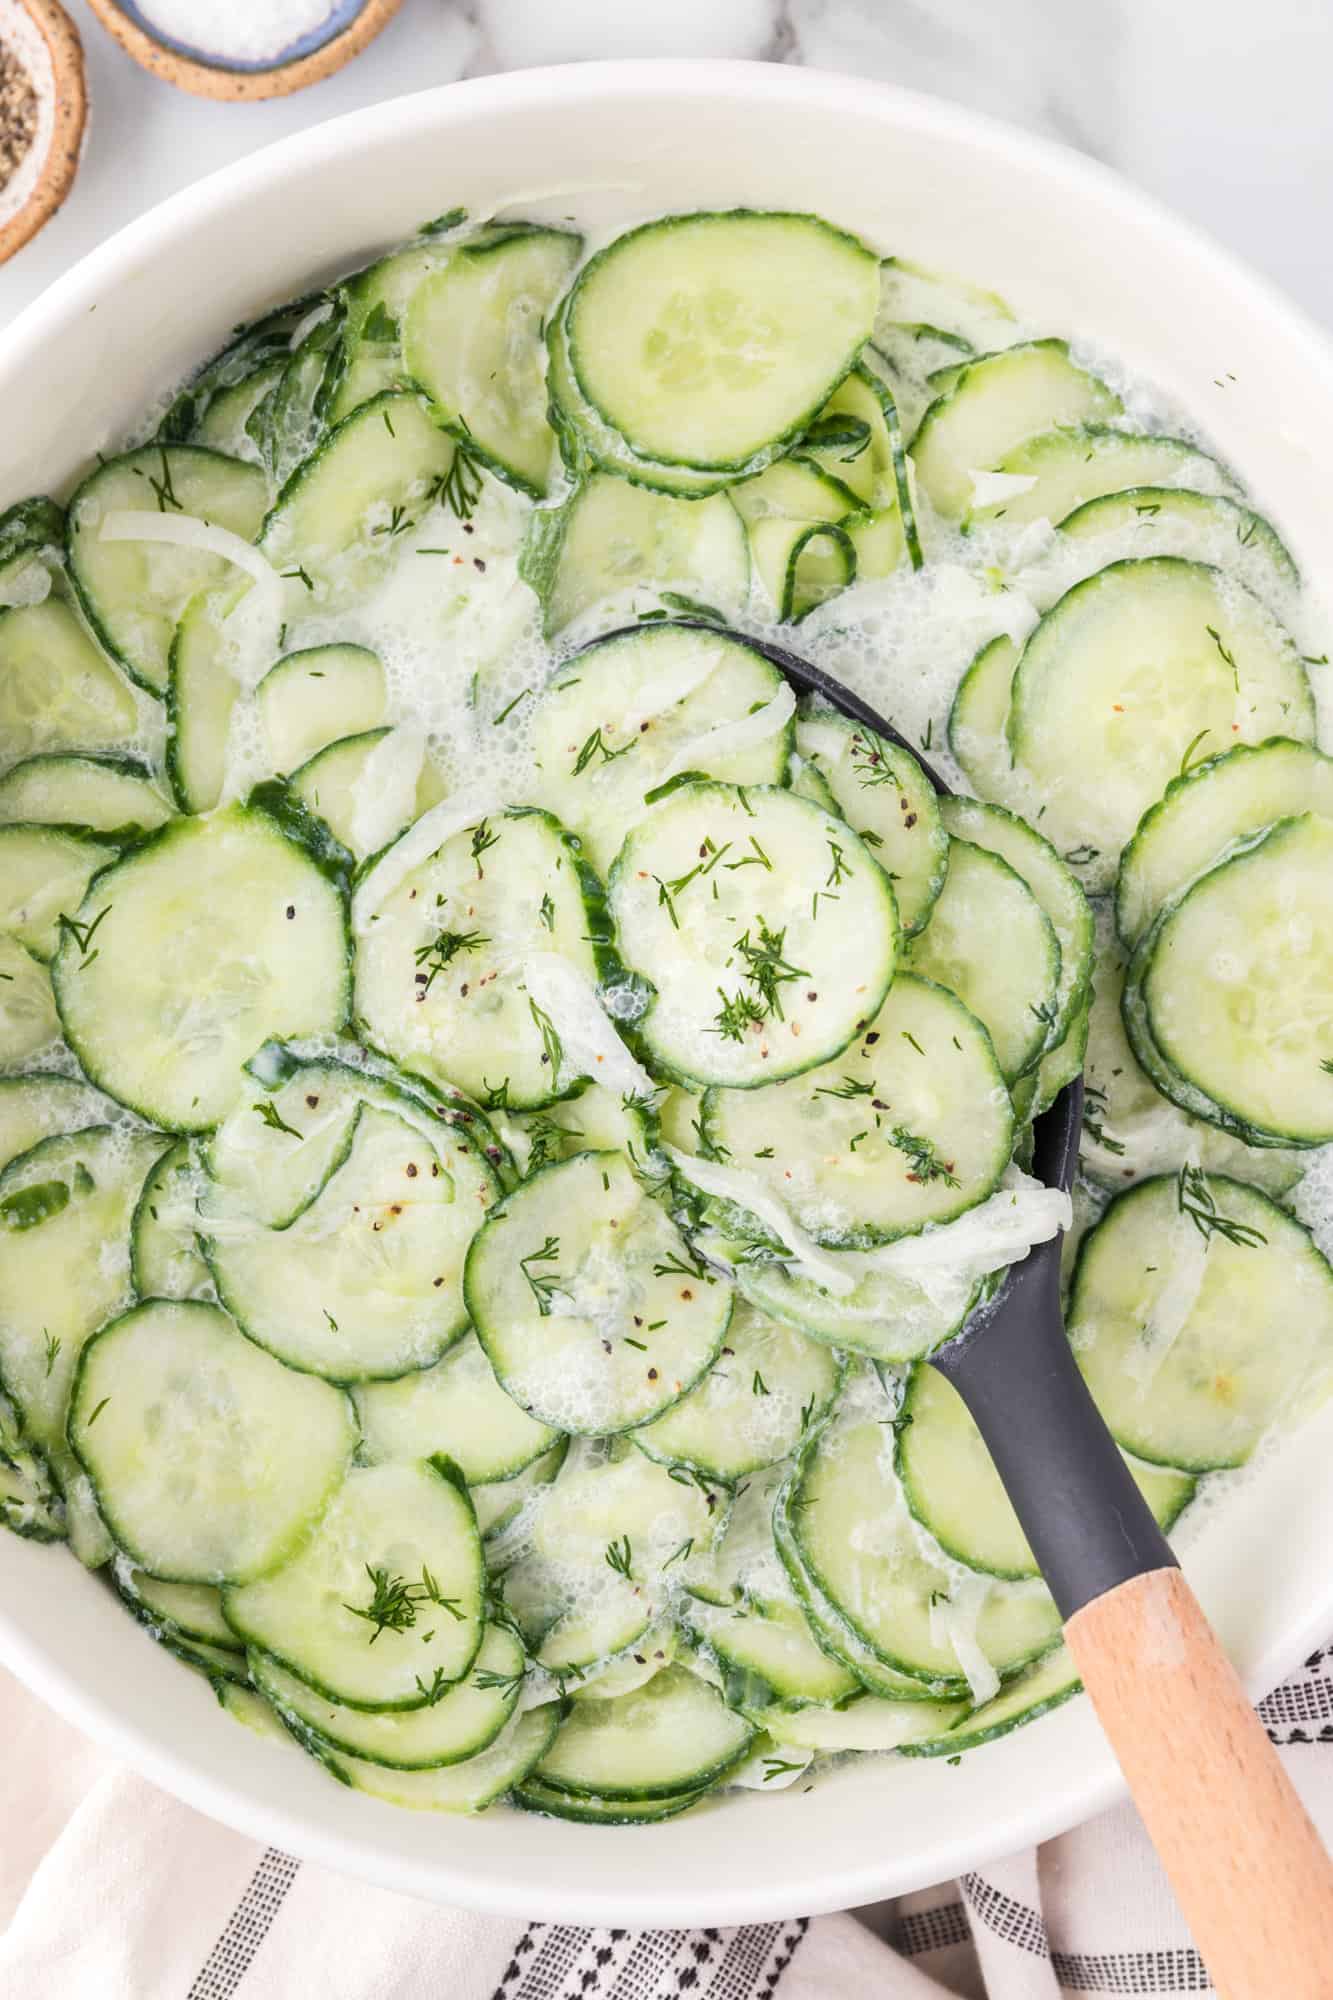 Overhead view of German cucumber salad in a white bowl with a serving spoon.